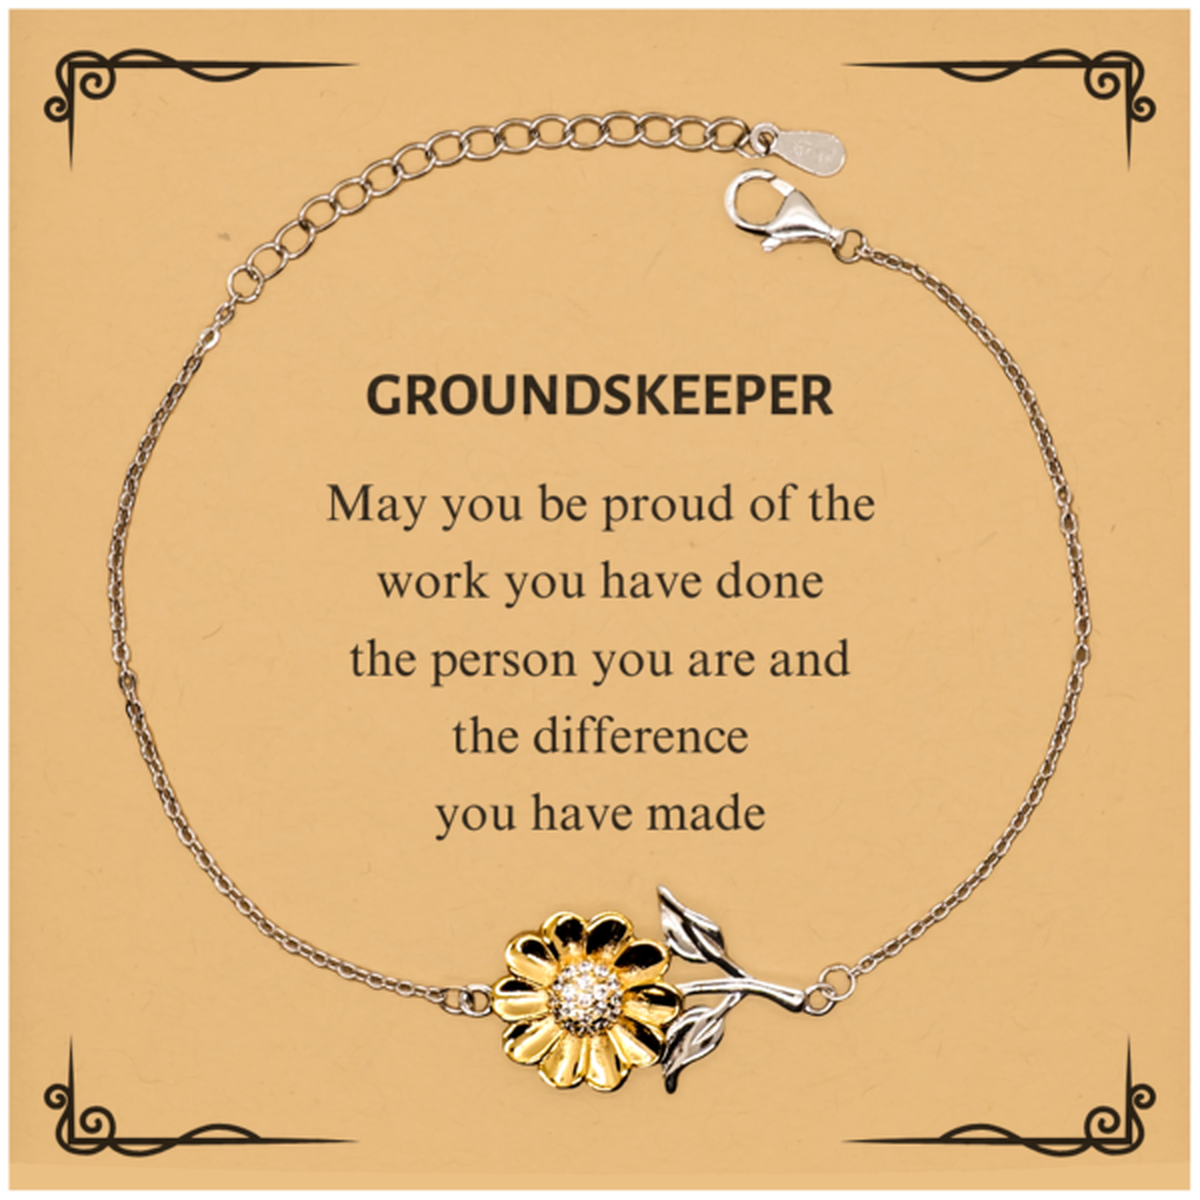 Groundskeeper May you be proud of the work you have done, Retirement Groundskeeper Sunflower Bracelet for Colleague Appreciation Gifts Amazing for Groundskeeper